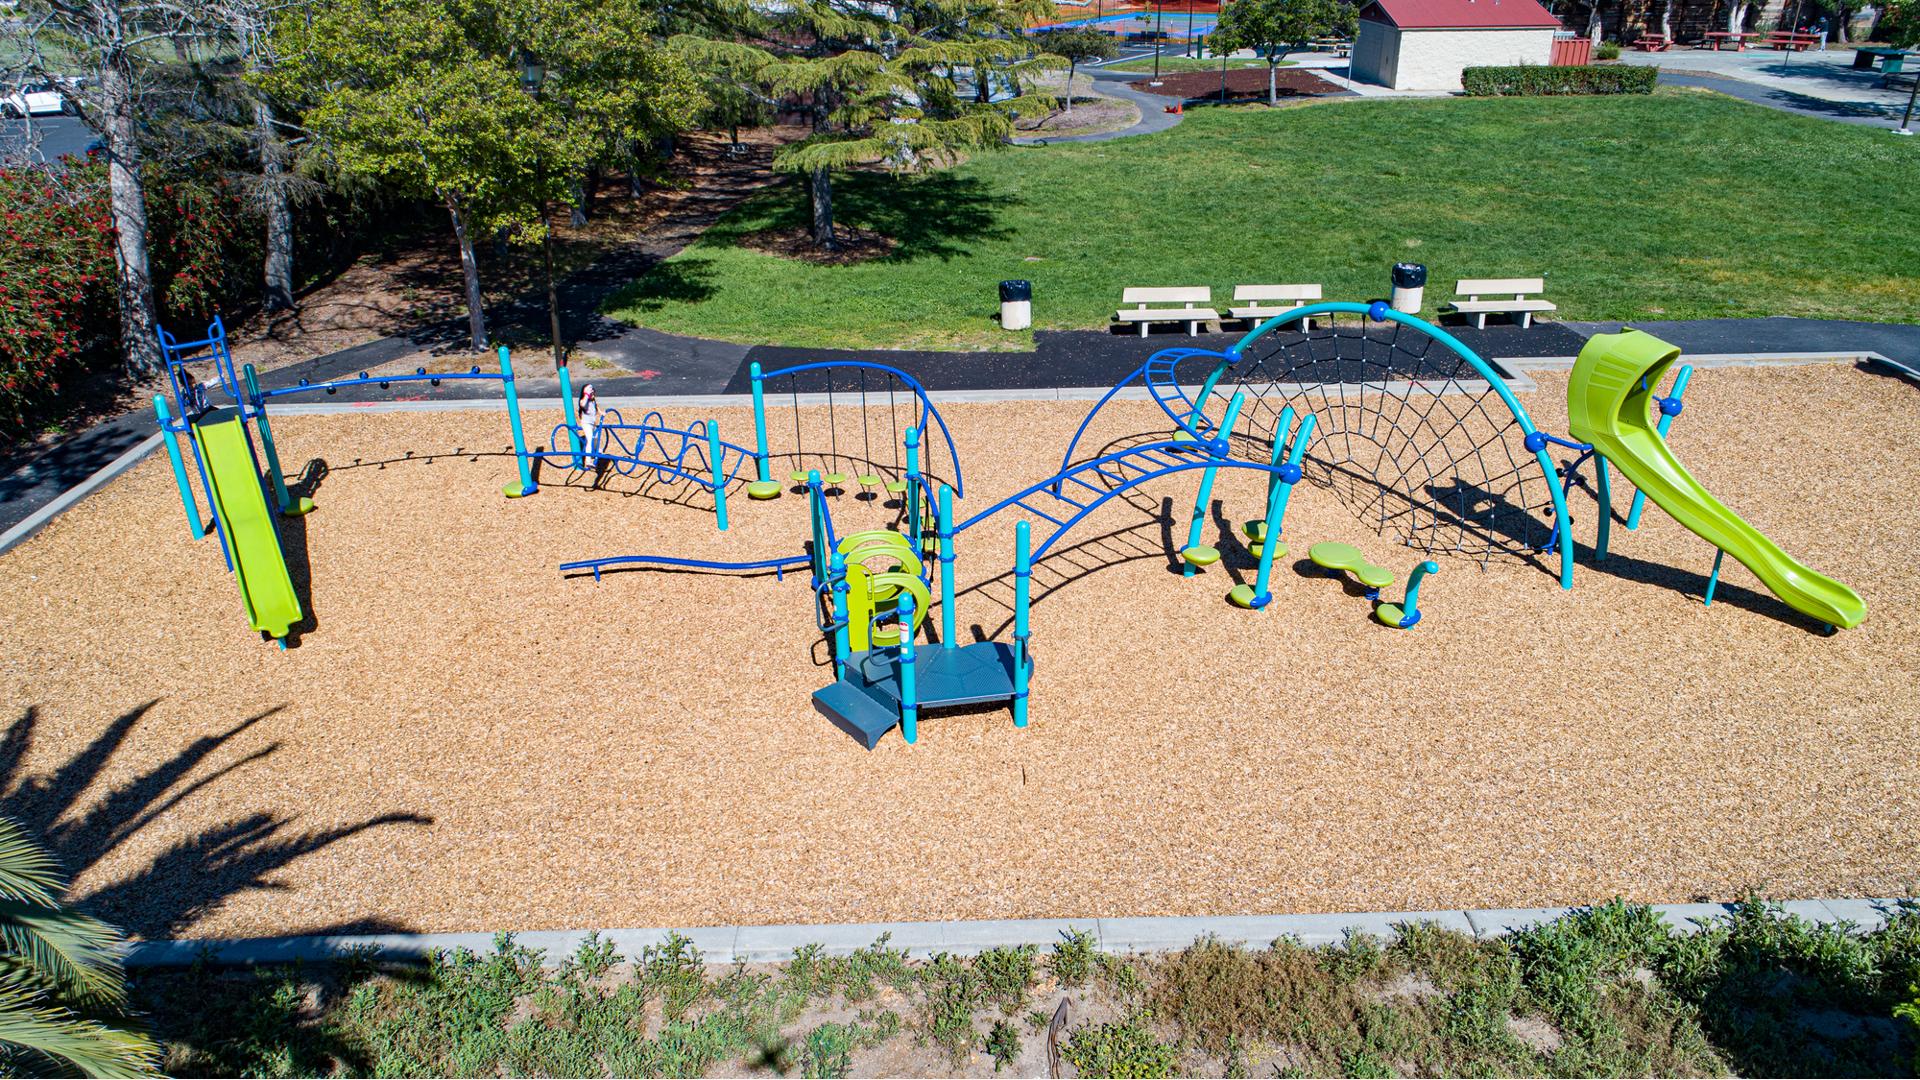 Full elevated view of a long continues play area with connecting climbers, slides, and other playground activities allowing for a continues play experience.